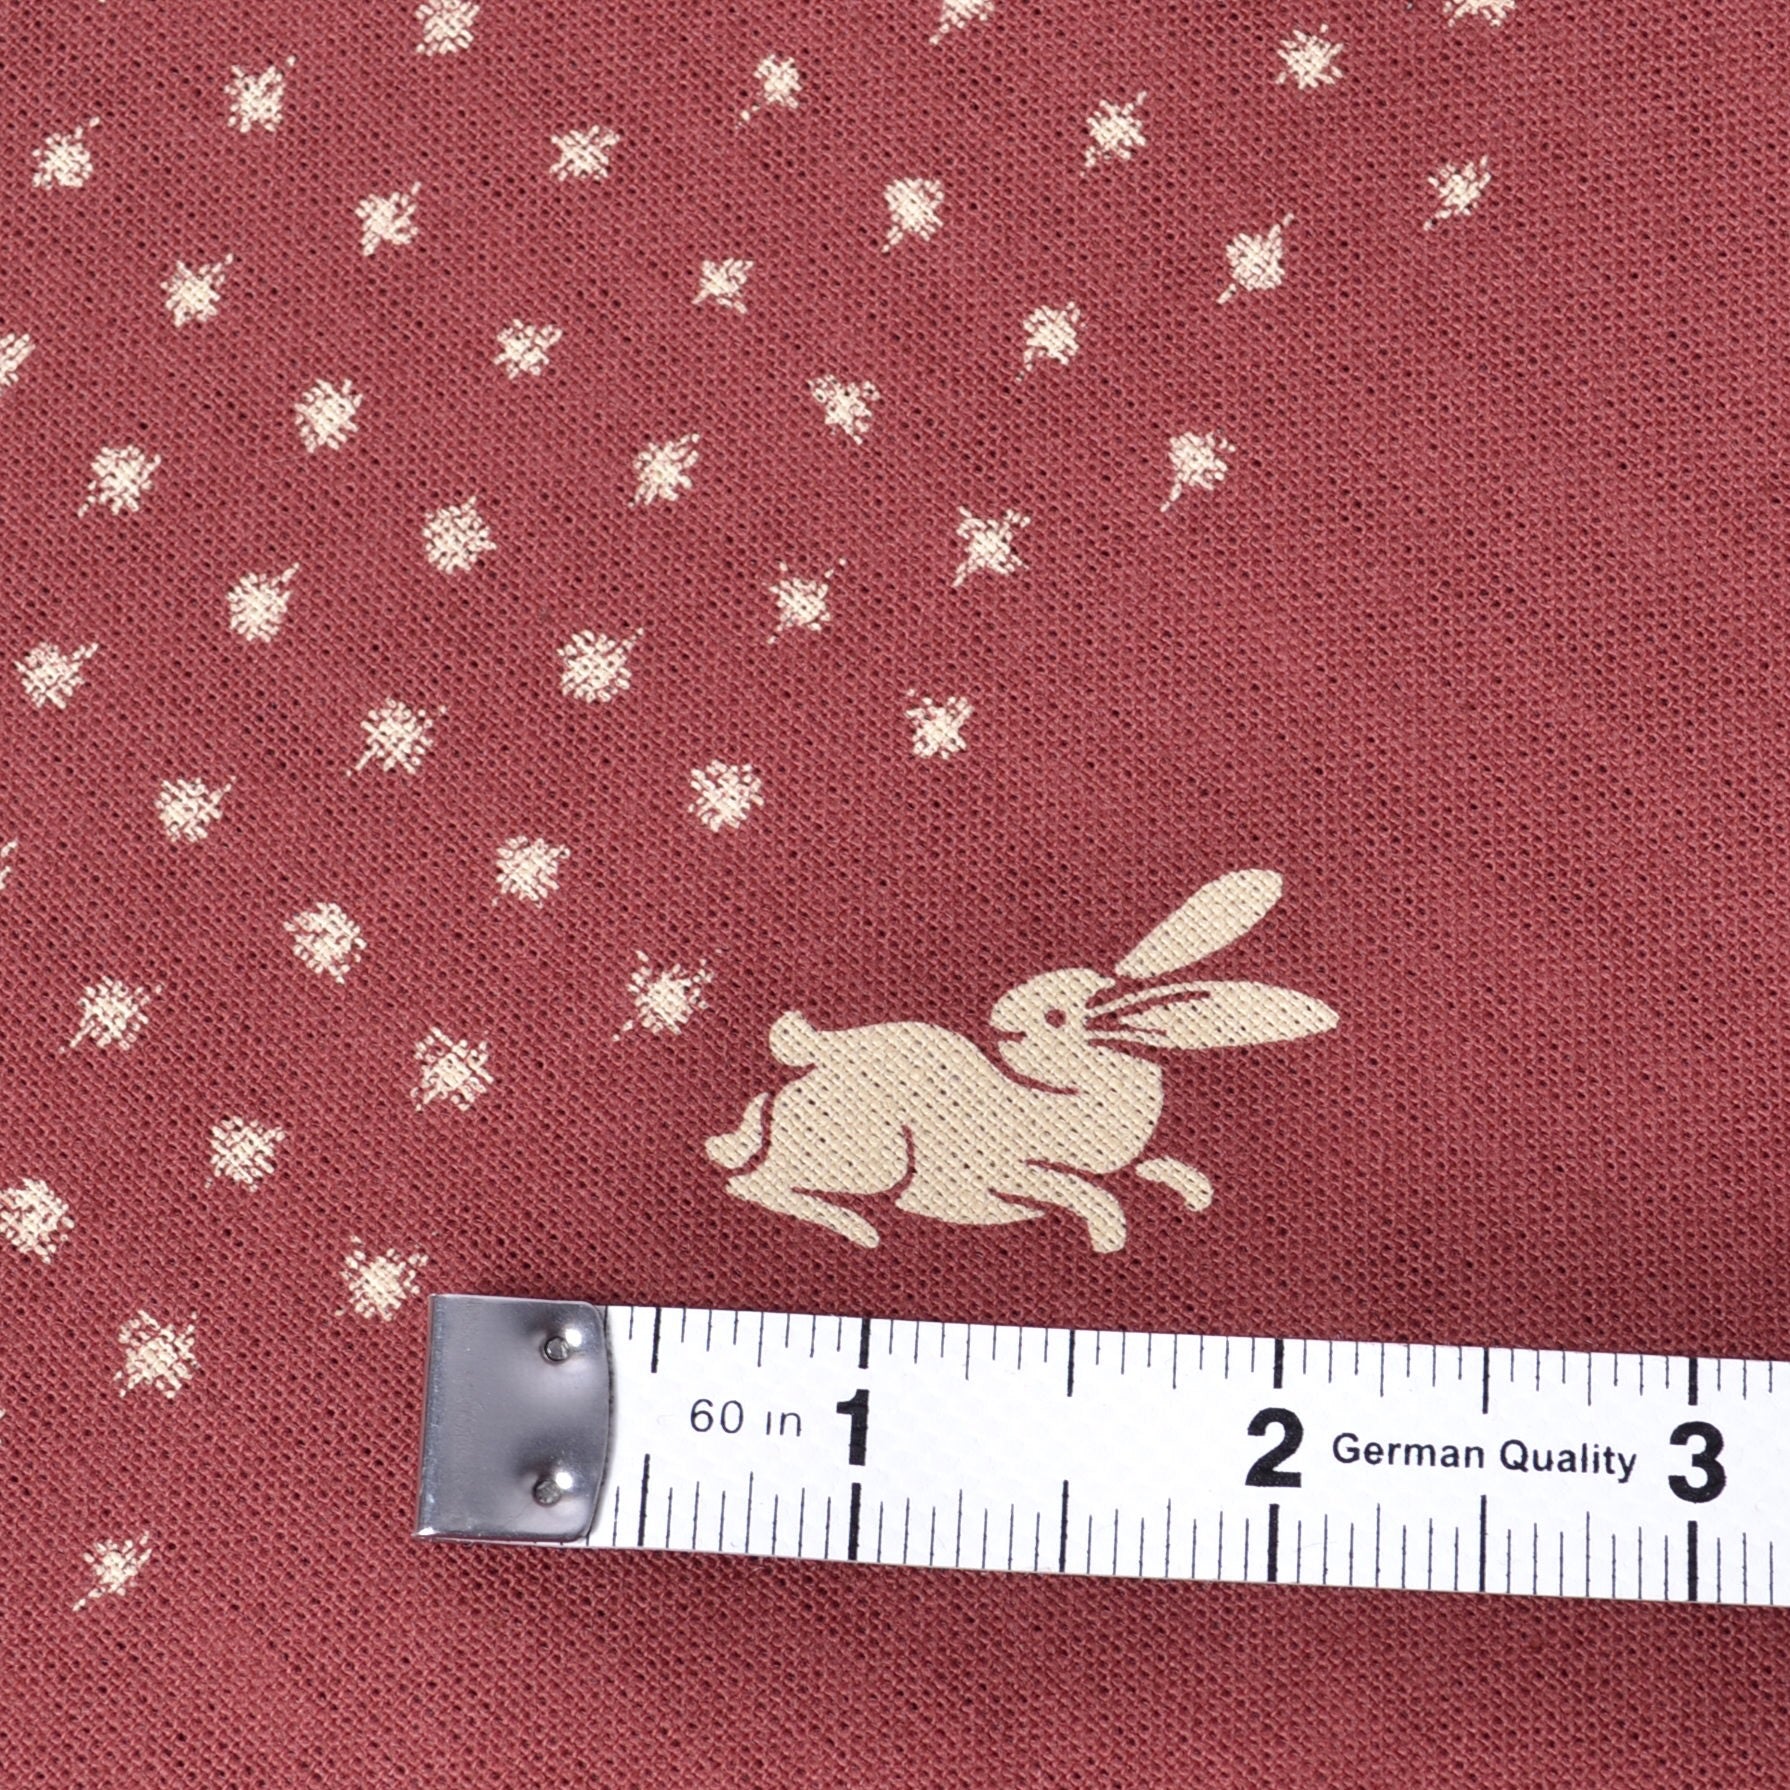 showing size of bunny on cotton fabric